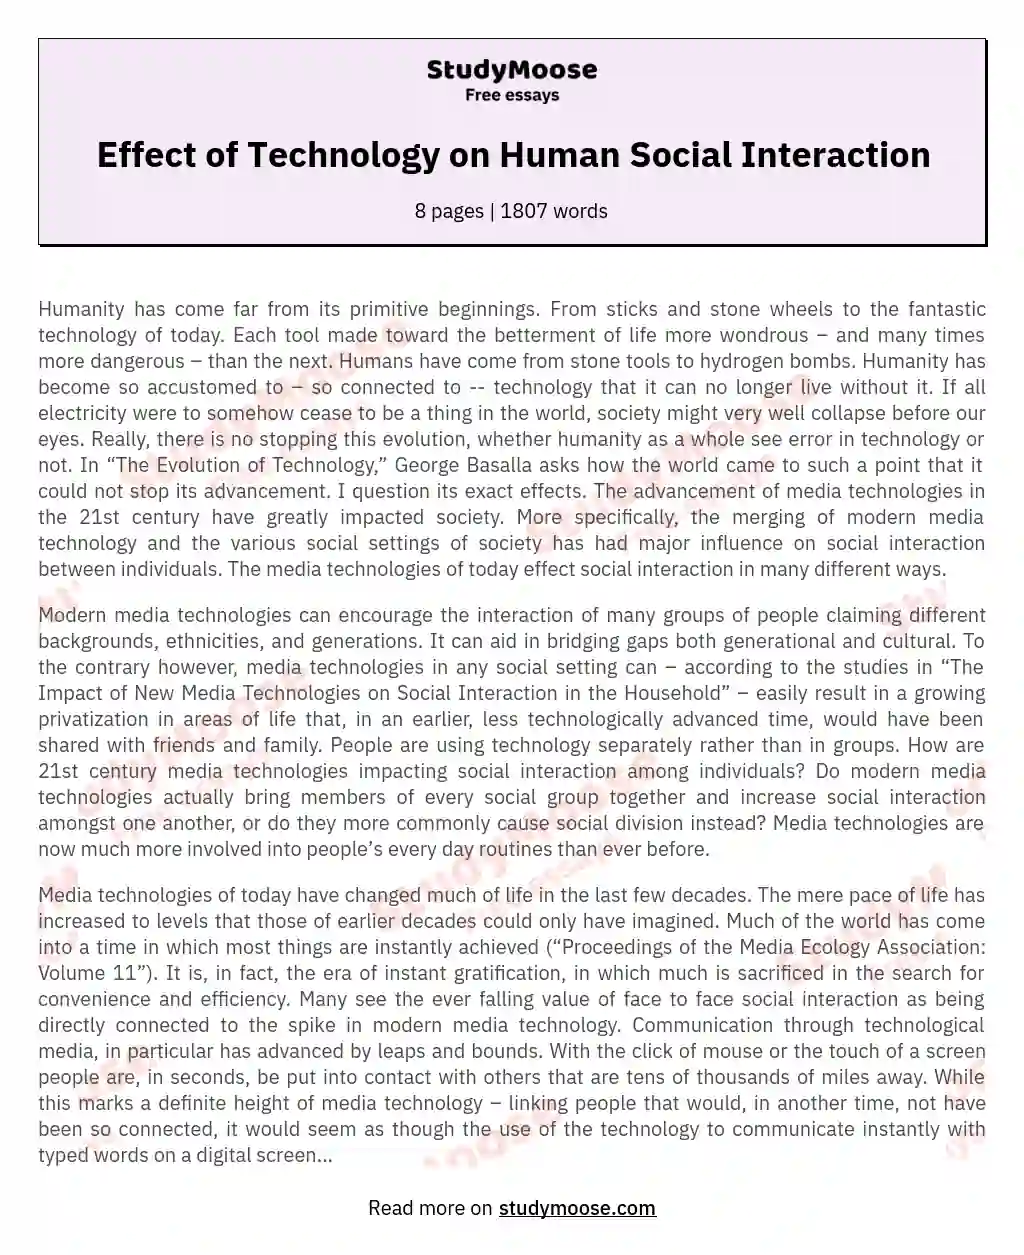 Effect of Technology on Human Social Interaction essay